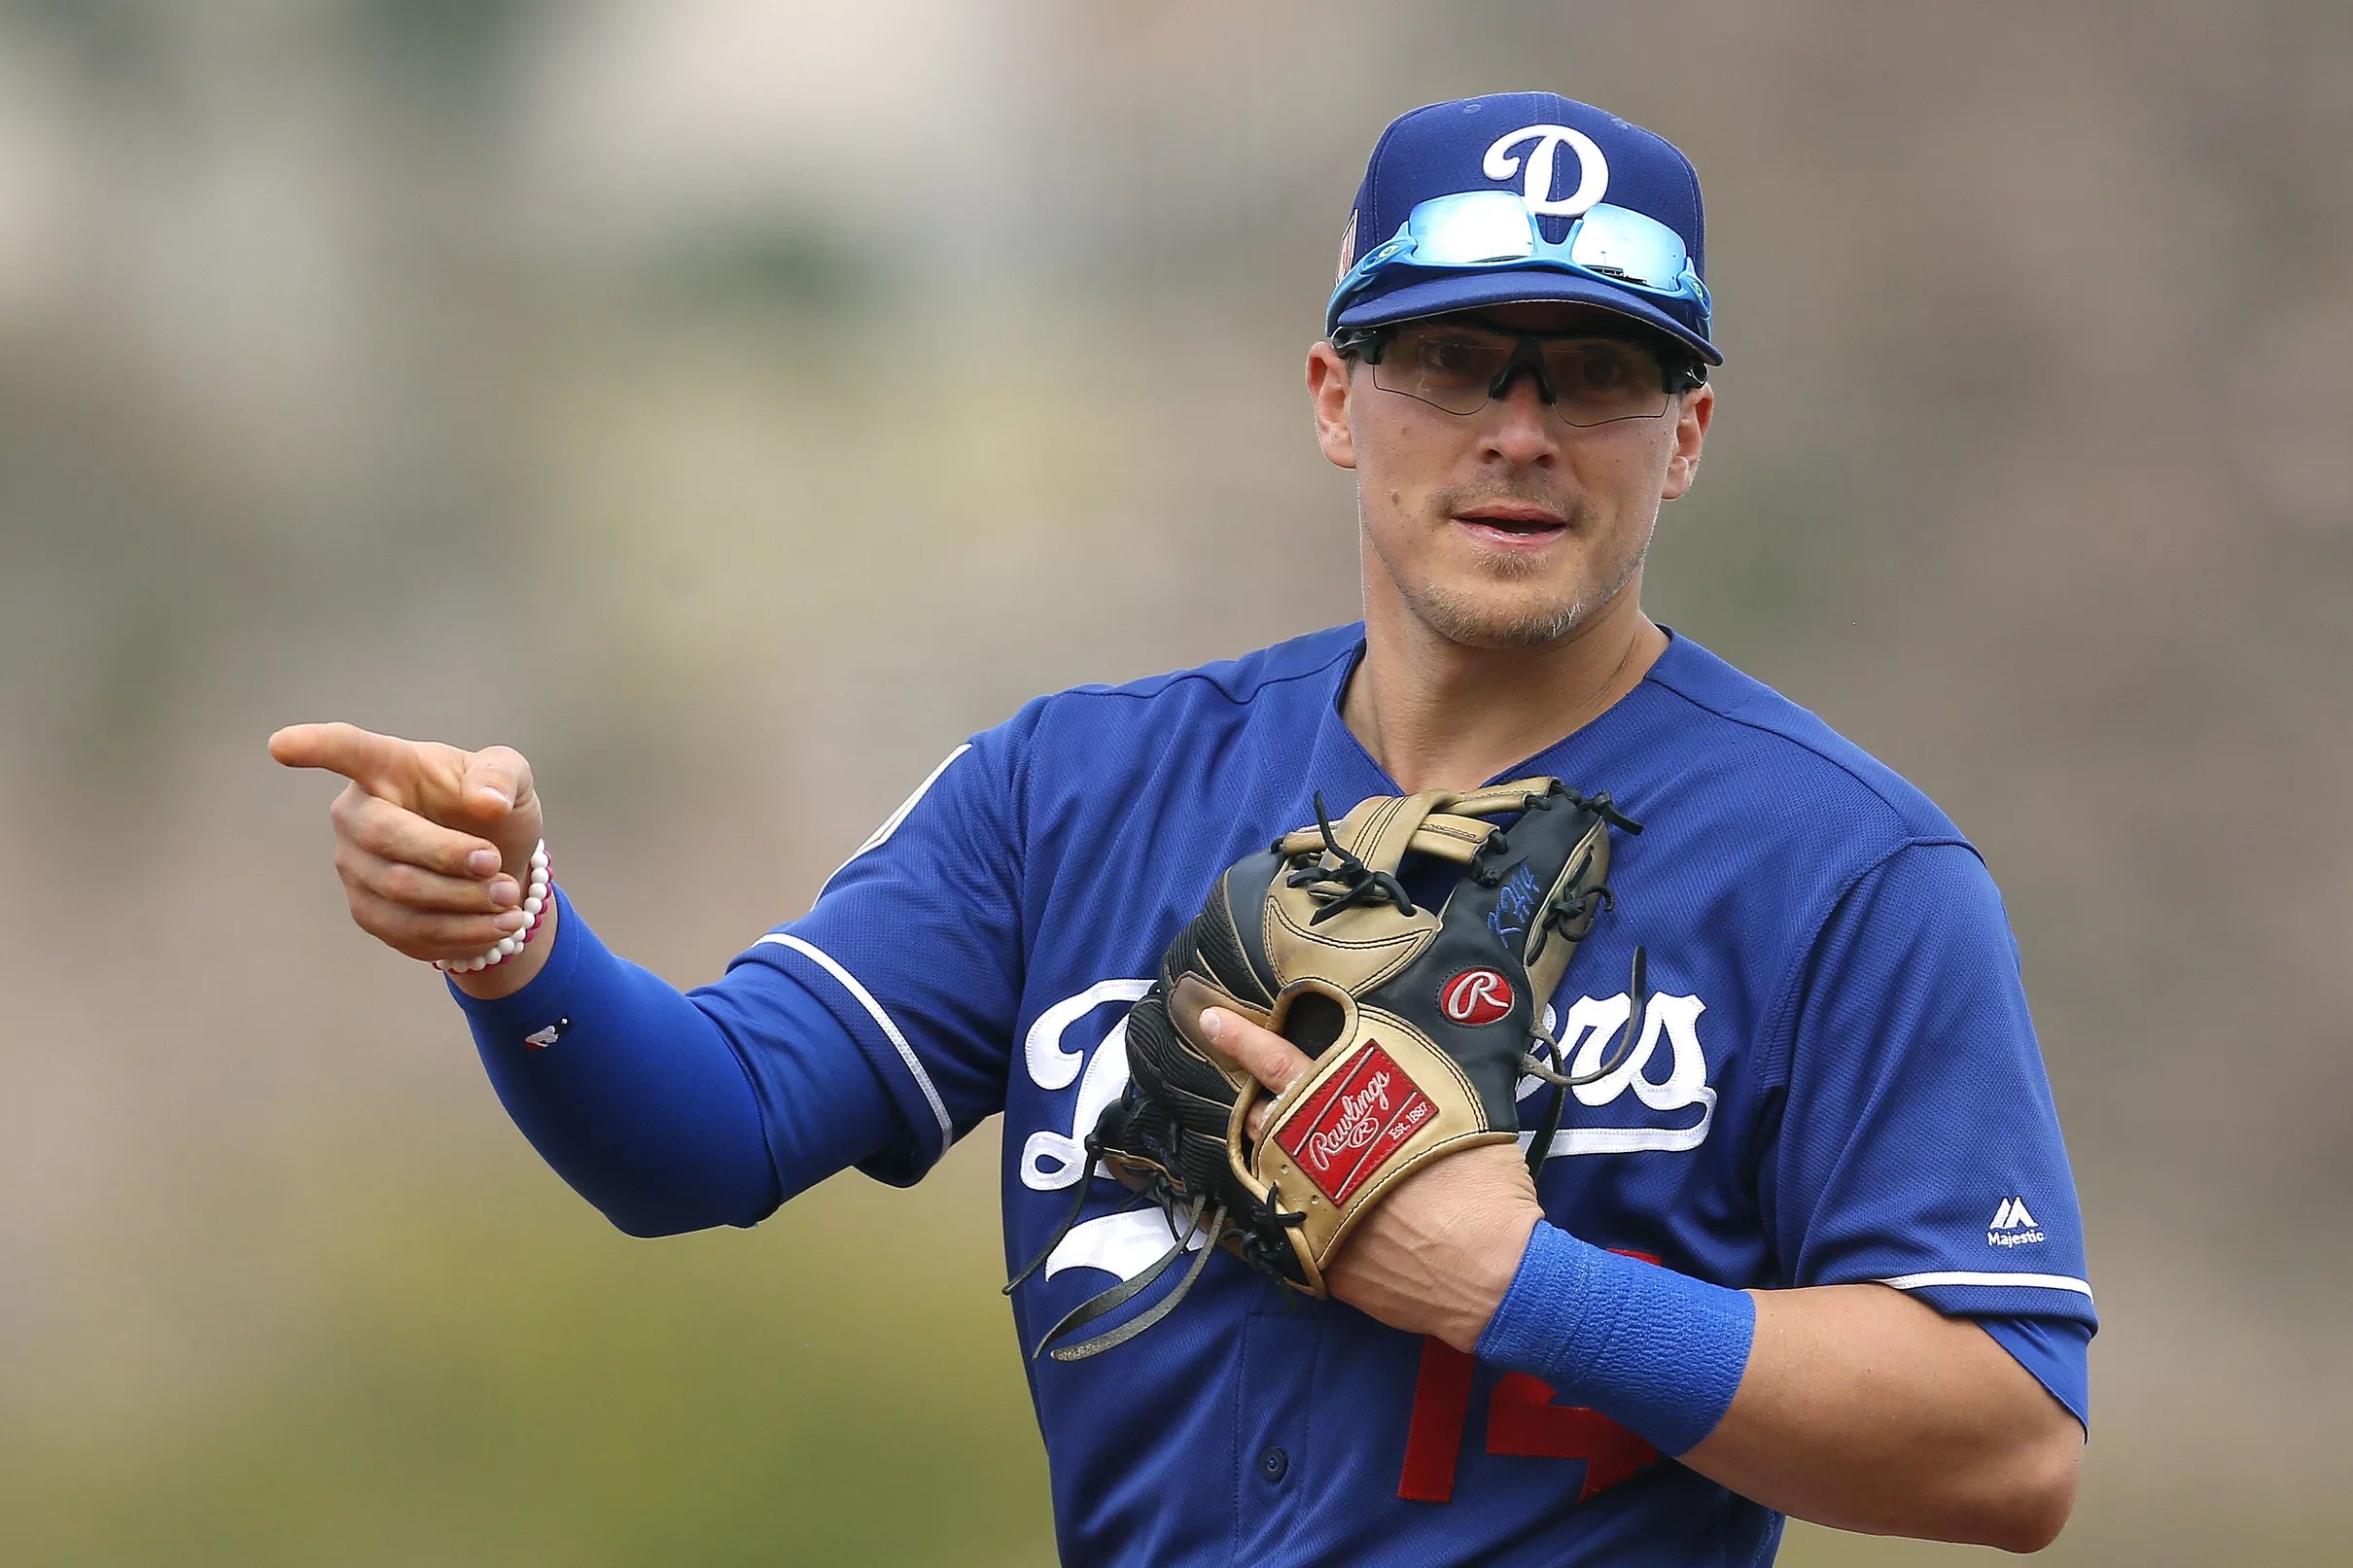 Enrique Hernandez will be the Dodgers second baseman